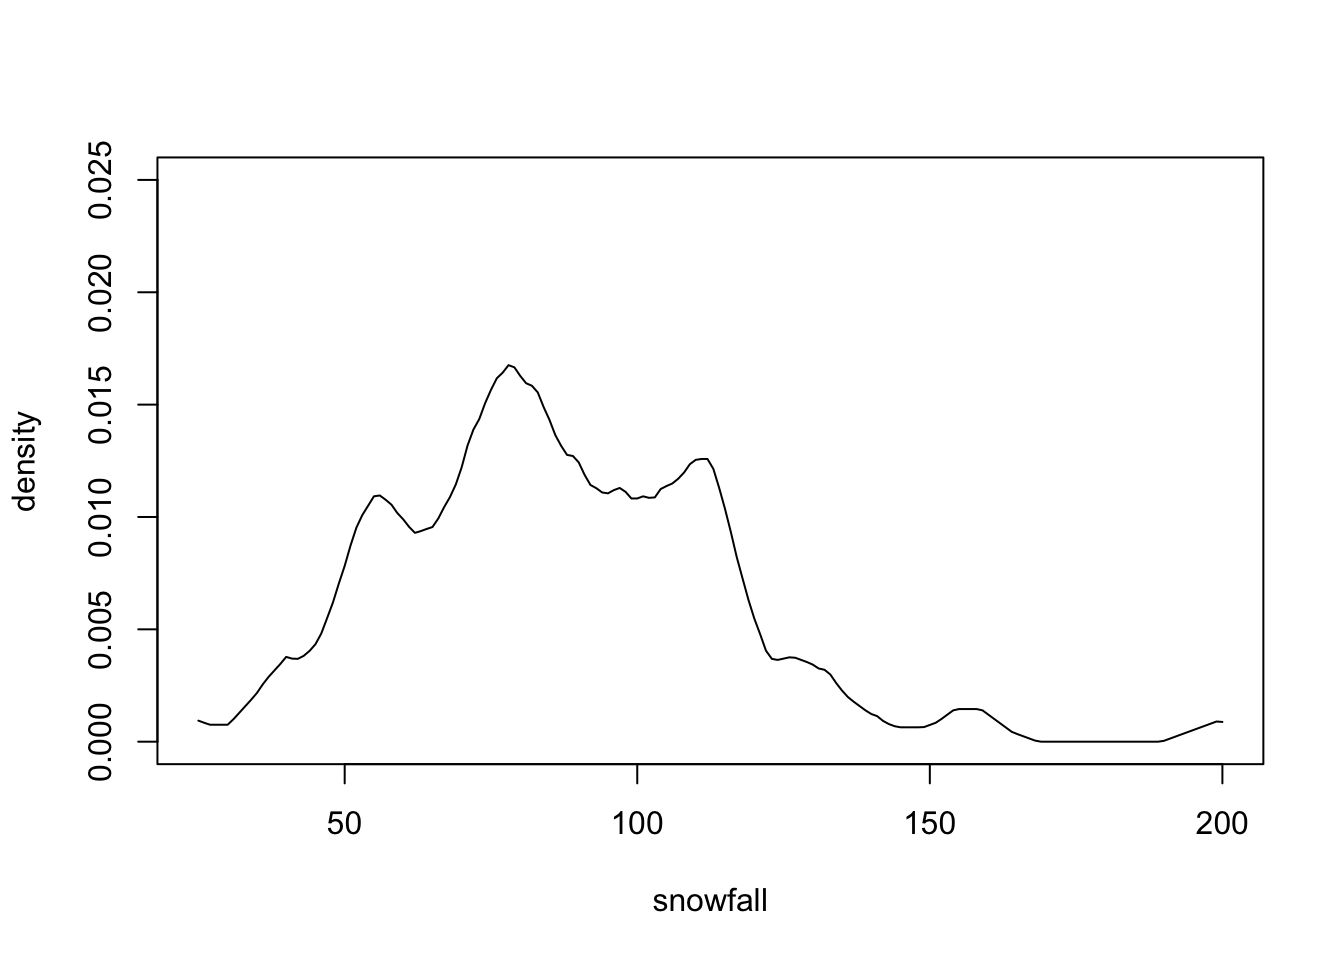 Manually computed kernel density estimate for the snowfall data, corresponding to bw=4 in density().